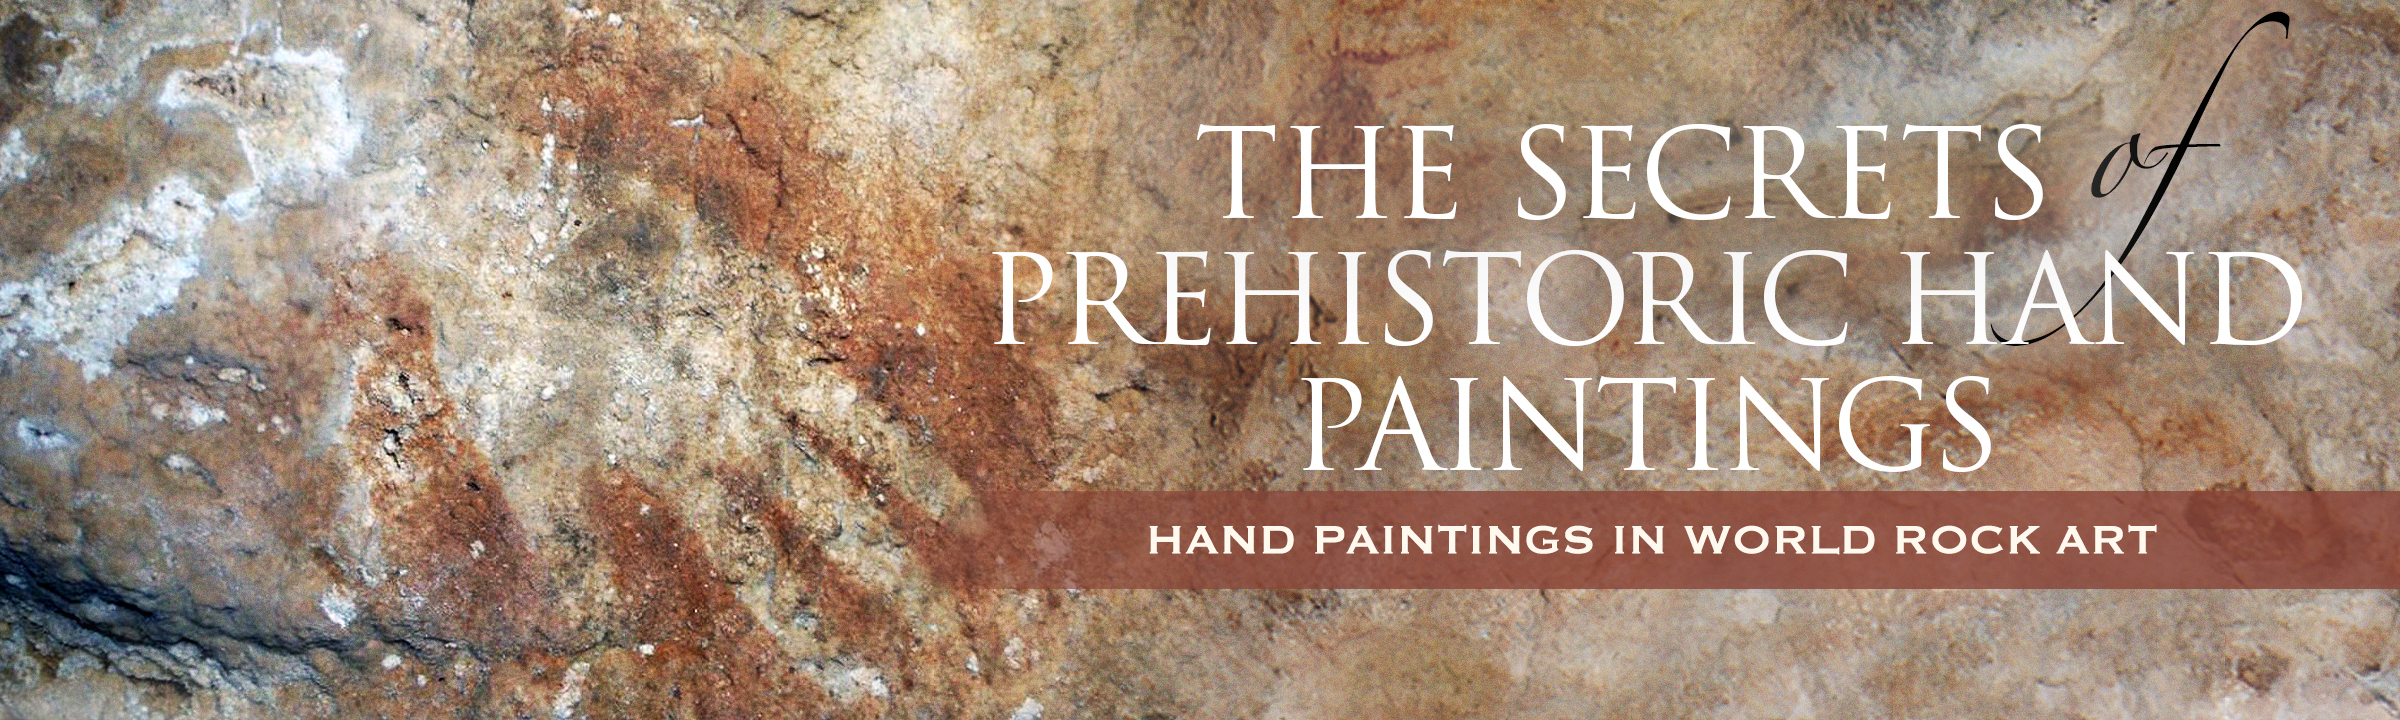 Rock Art Prehistoric Hand Paintings Hands Cave of Maltravieso Cáceres Extremadura Spain Archaeology